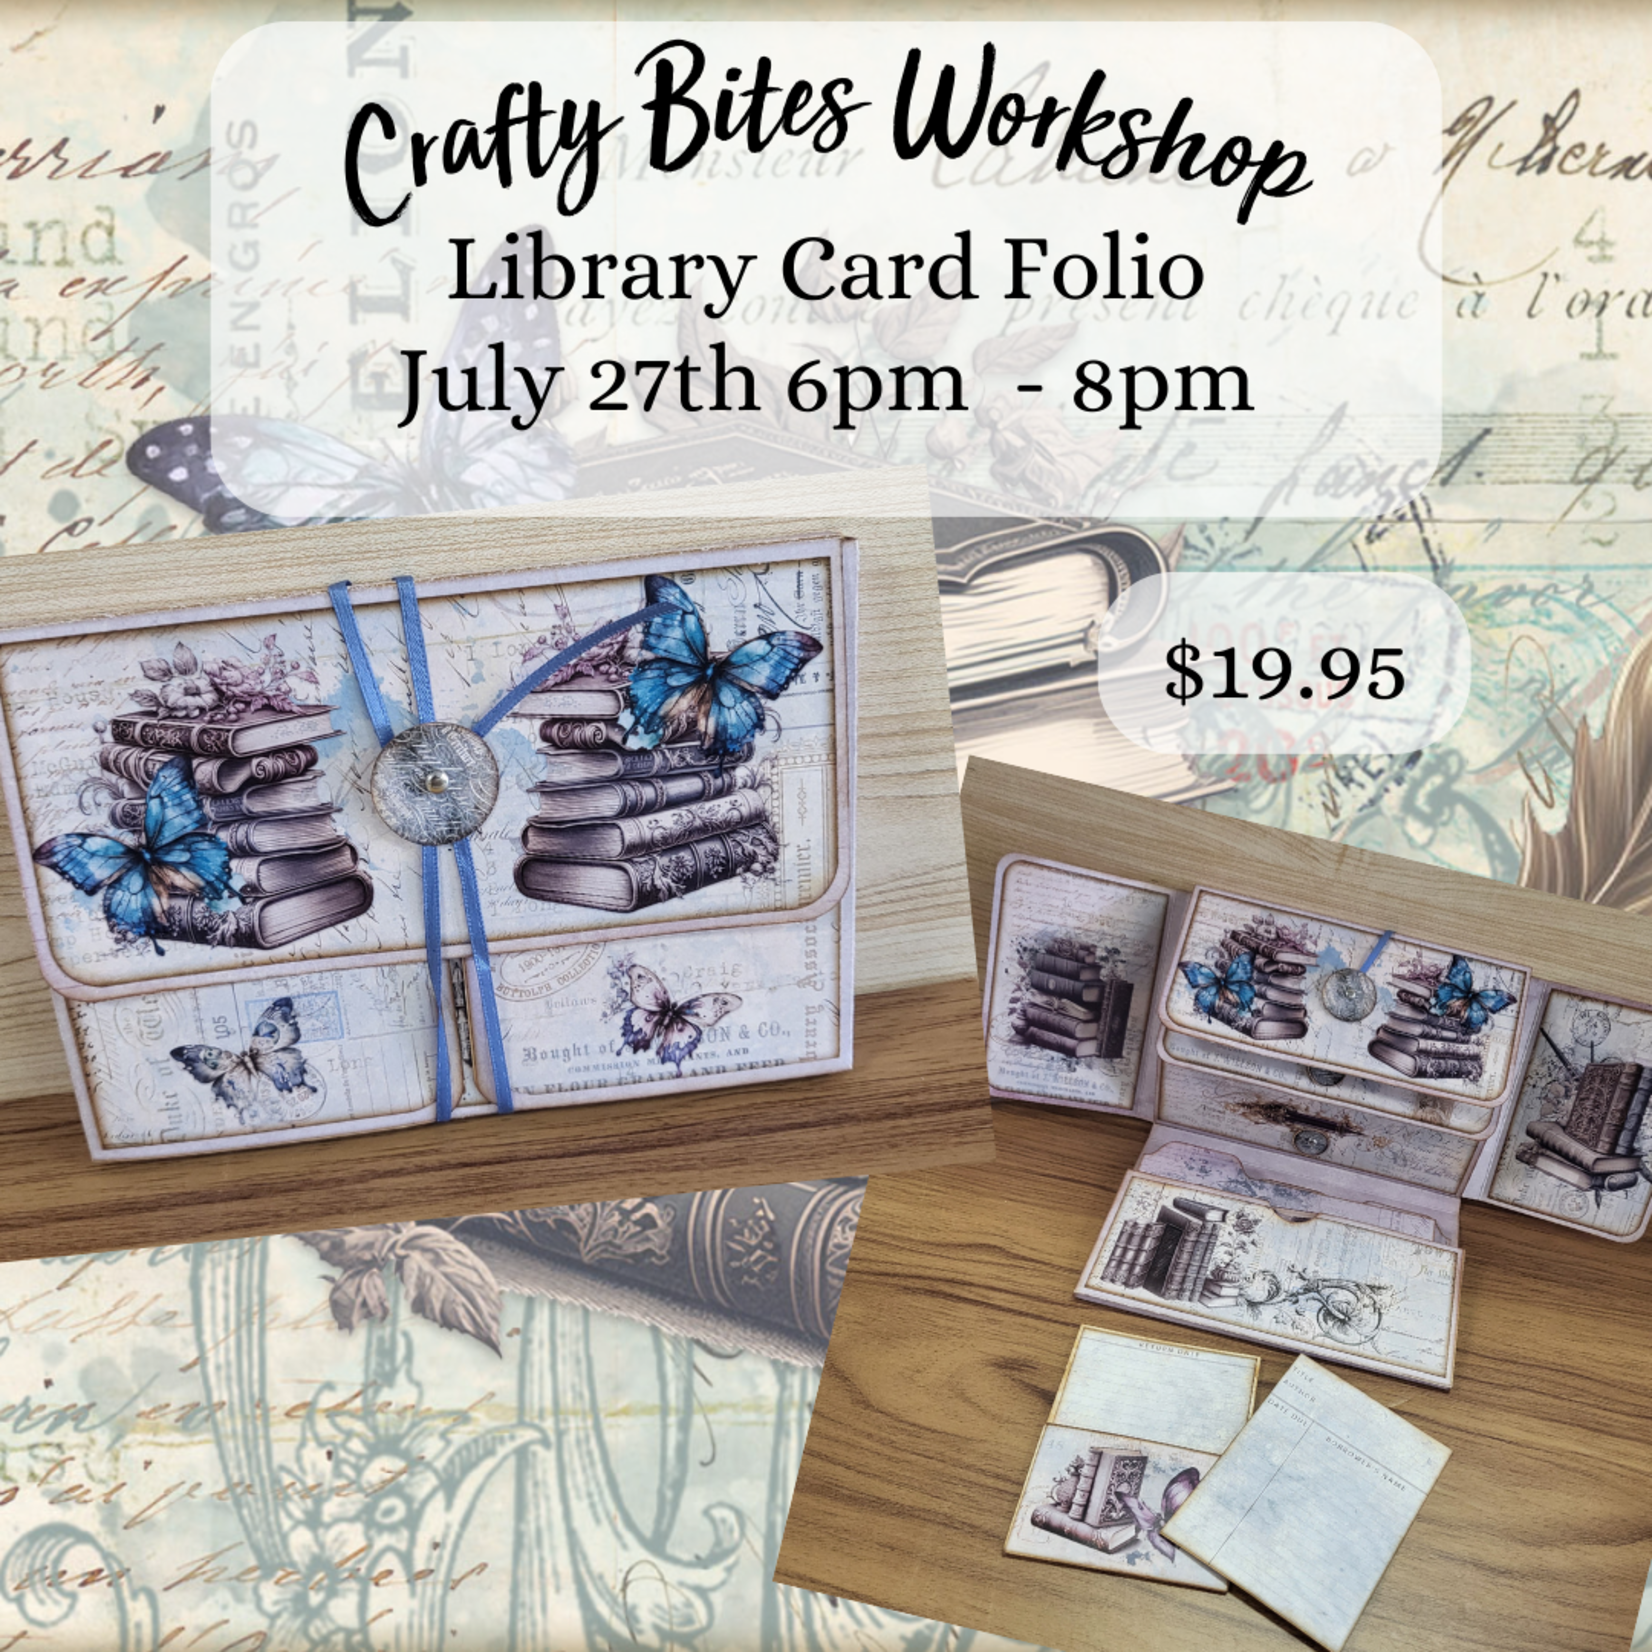 Library Card Folio Workshop - Thursday, July 27th 6pm